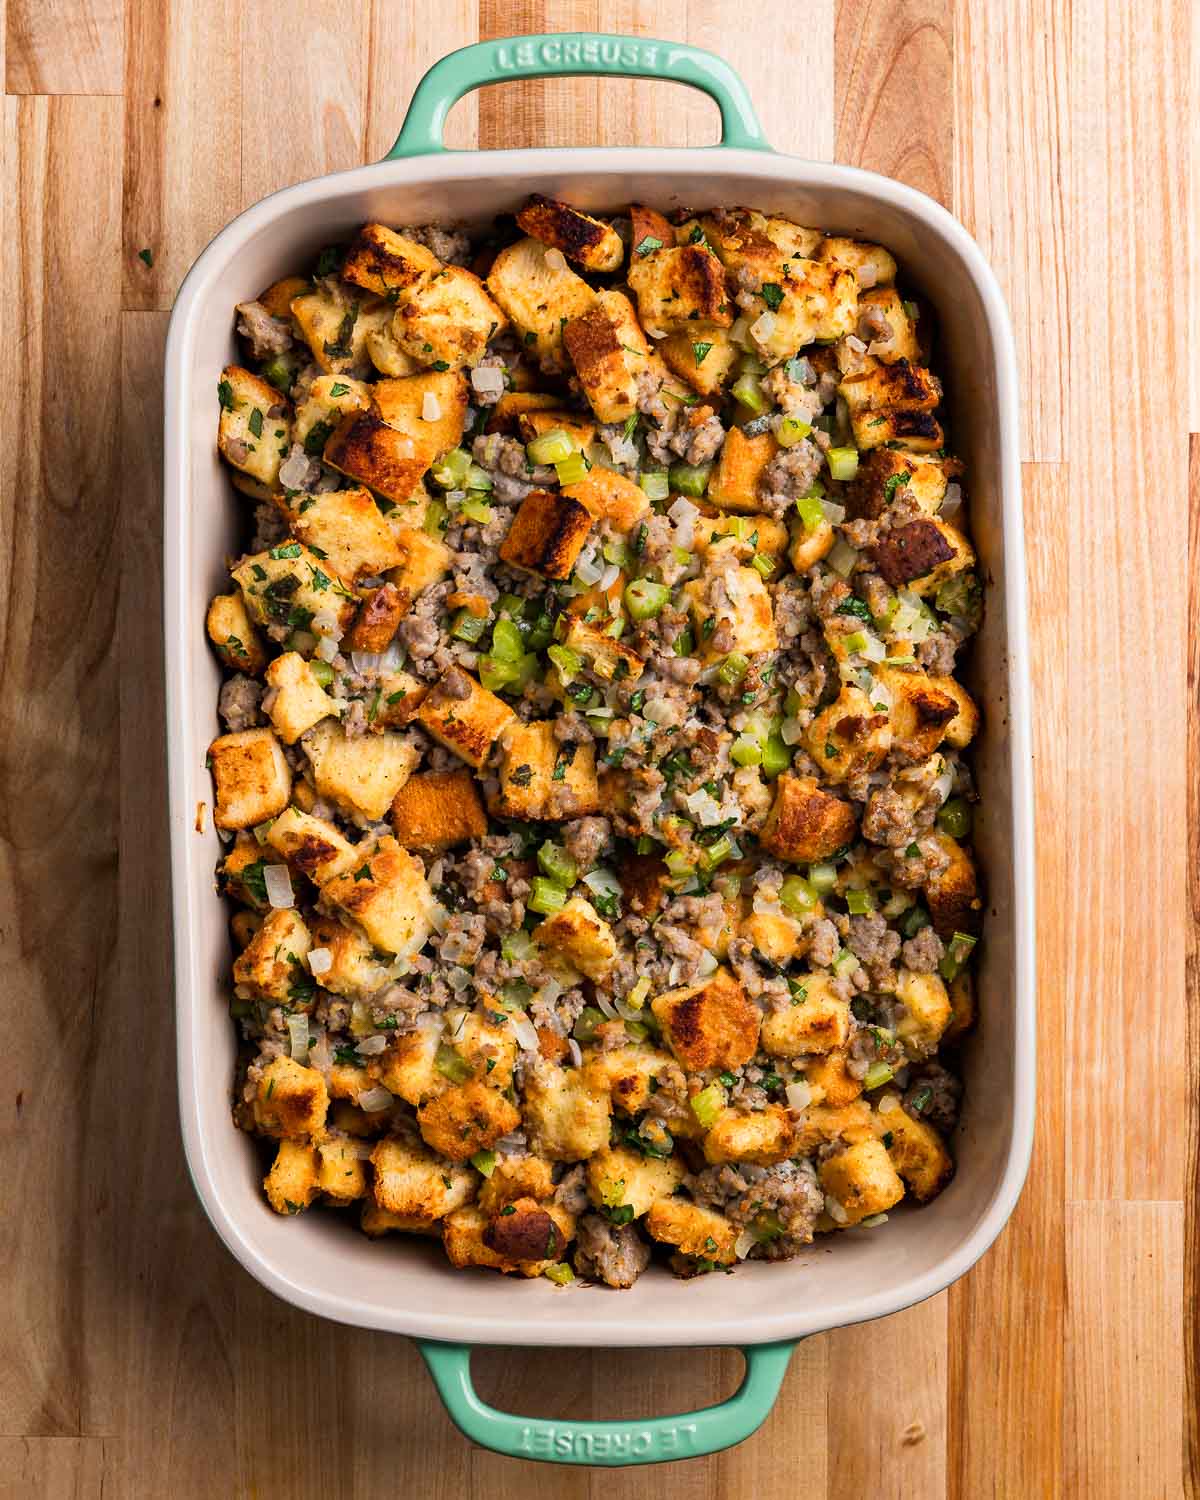 Overhead shot of baking dish with Italian sausage stuffing.